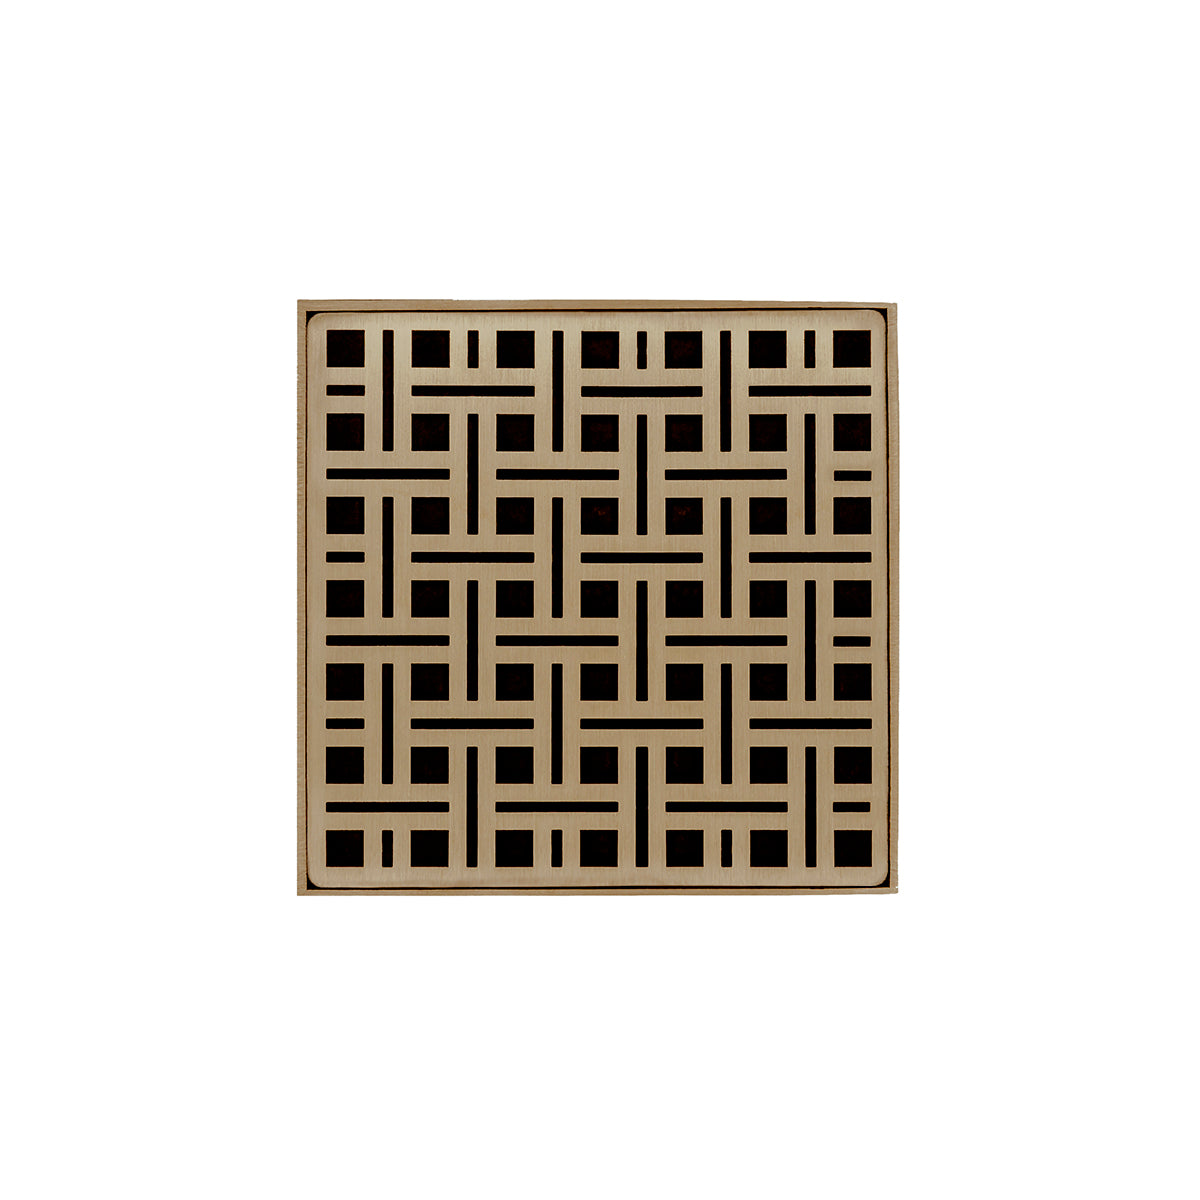 Infinity Drain 5" x 5" VD 5 Premium Center Drain Kit with Weave Pattern Decorative Plate with ABS Drain Body, 2" Outlet